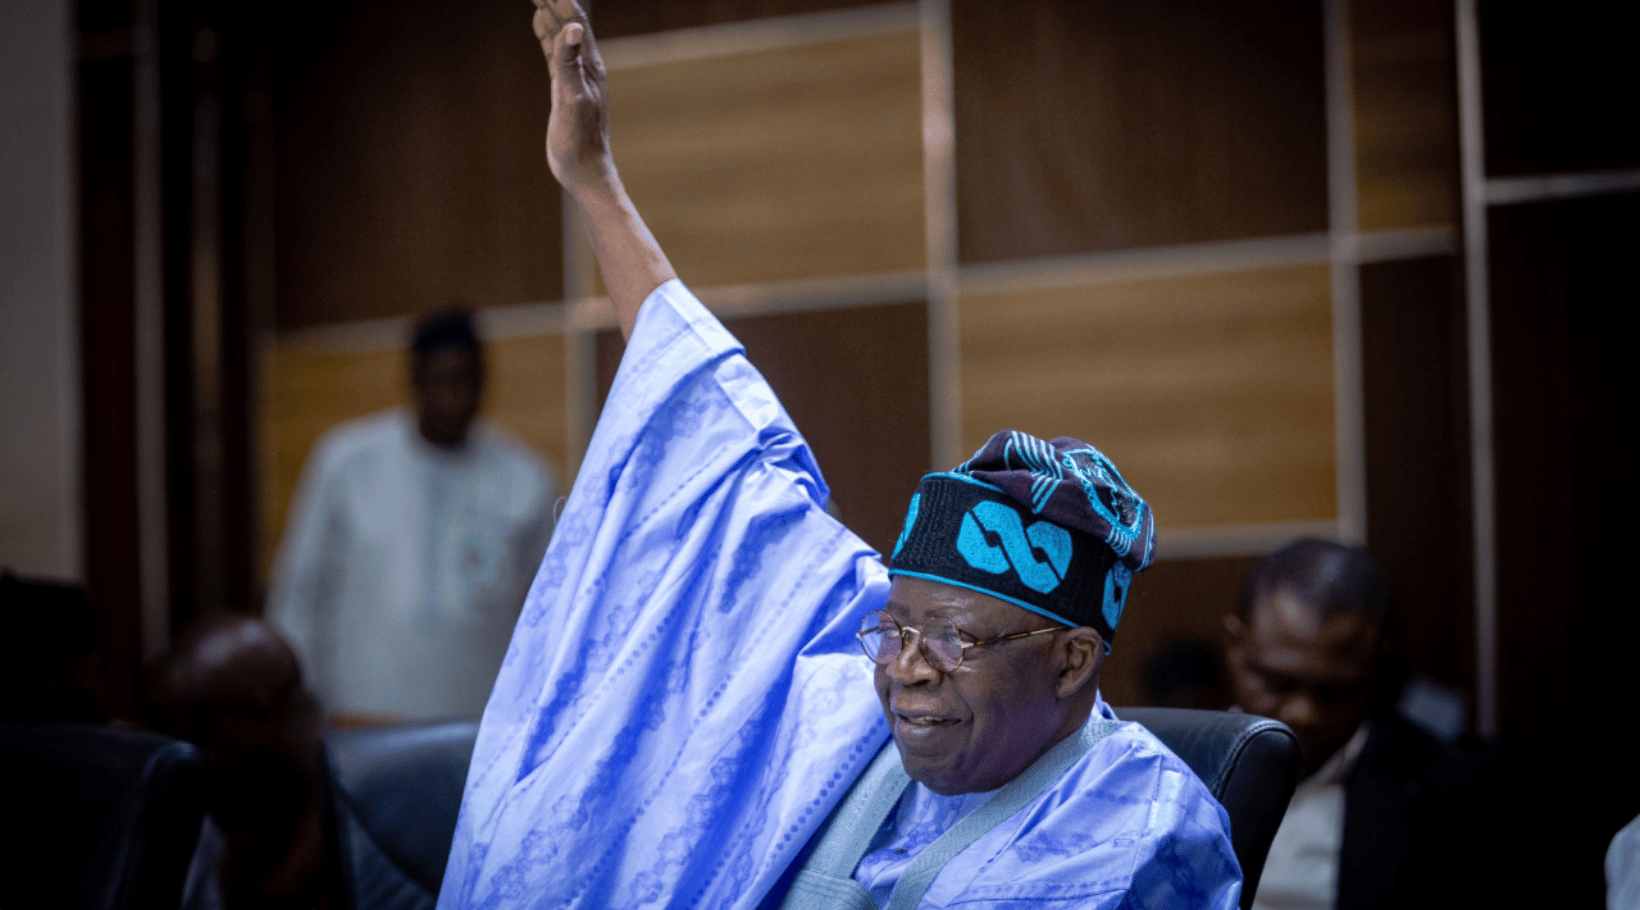 BREAKING: Tinubu Departs UK To Meet Super Eagles, APC Chieftains In Kano